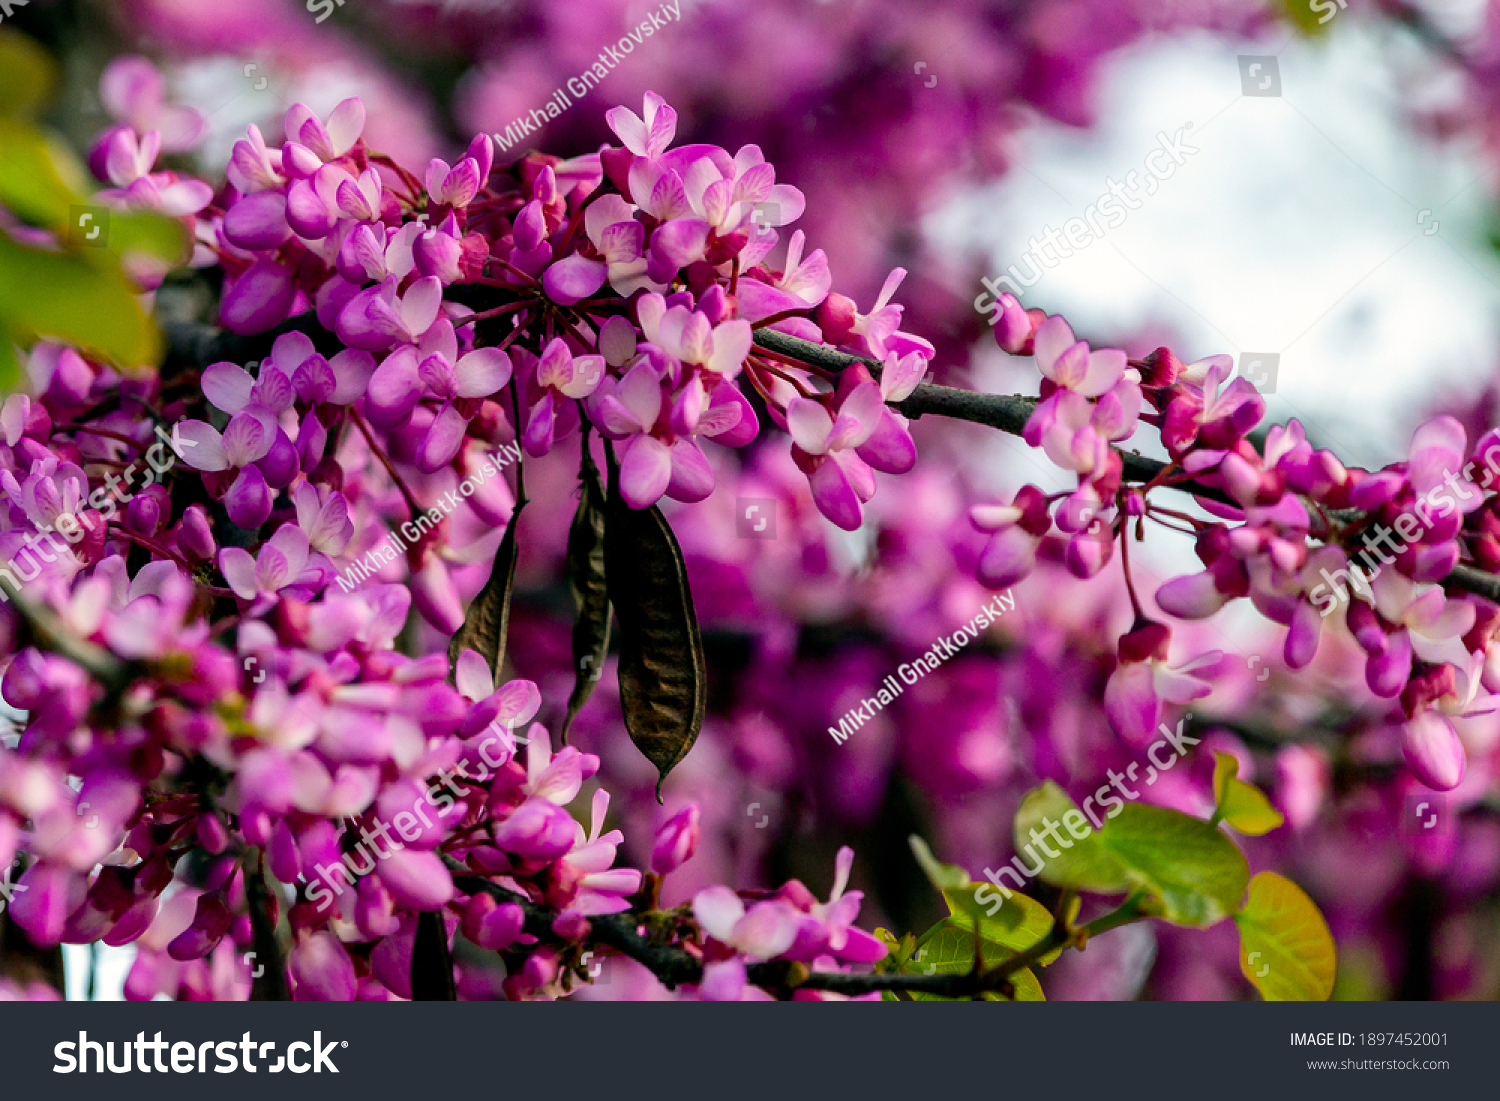 European Cercis, or Judas tree, or European scarlet. Close-up of pink flowers of Cercis siliquastrum. Cercis is a tree or shrub, a species of the genus Cercis of the legume family or Fabaceae. #1897452001